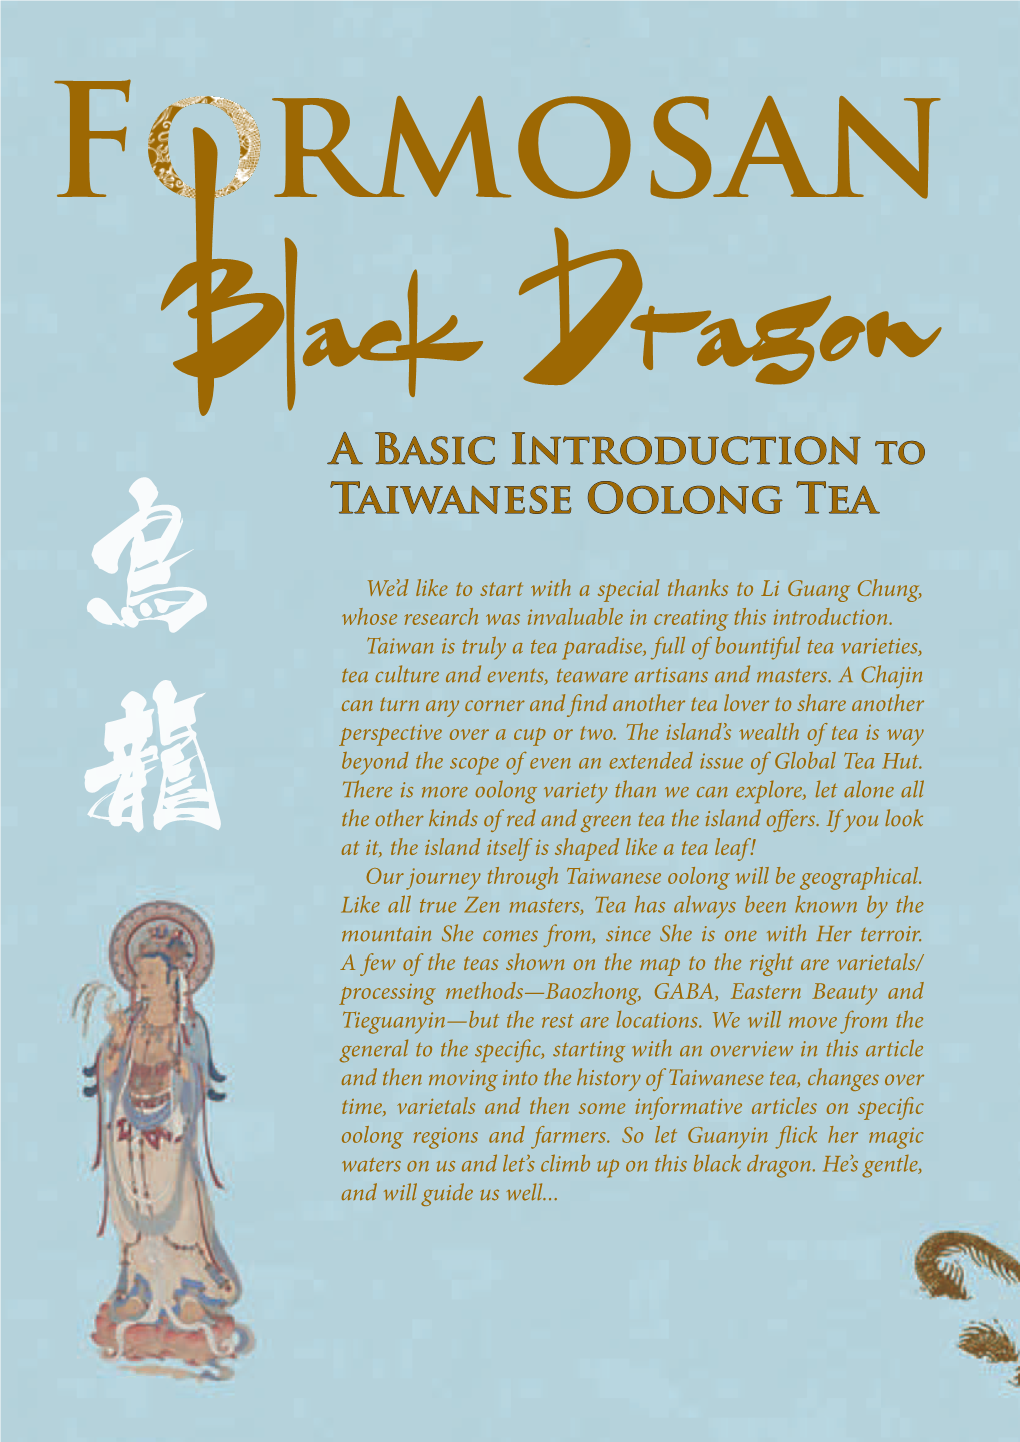 A Basic Introduction to Taiwanese Oolong Tea